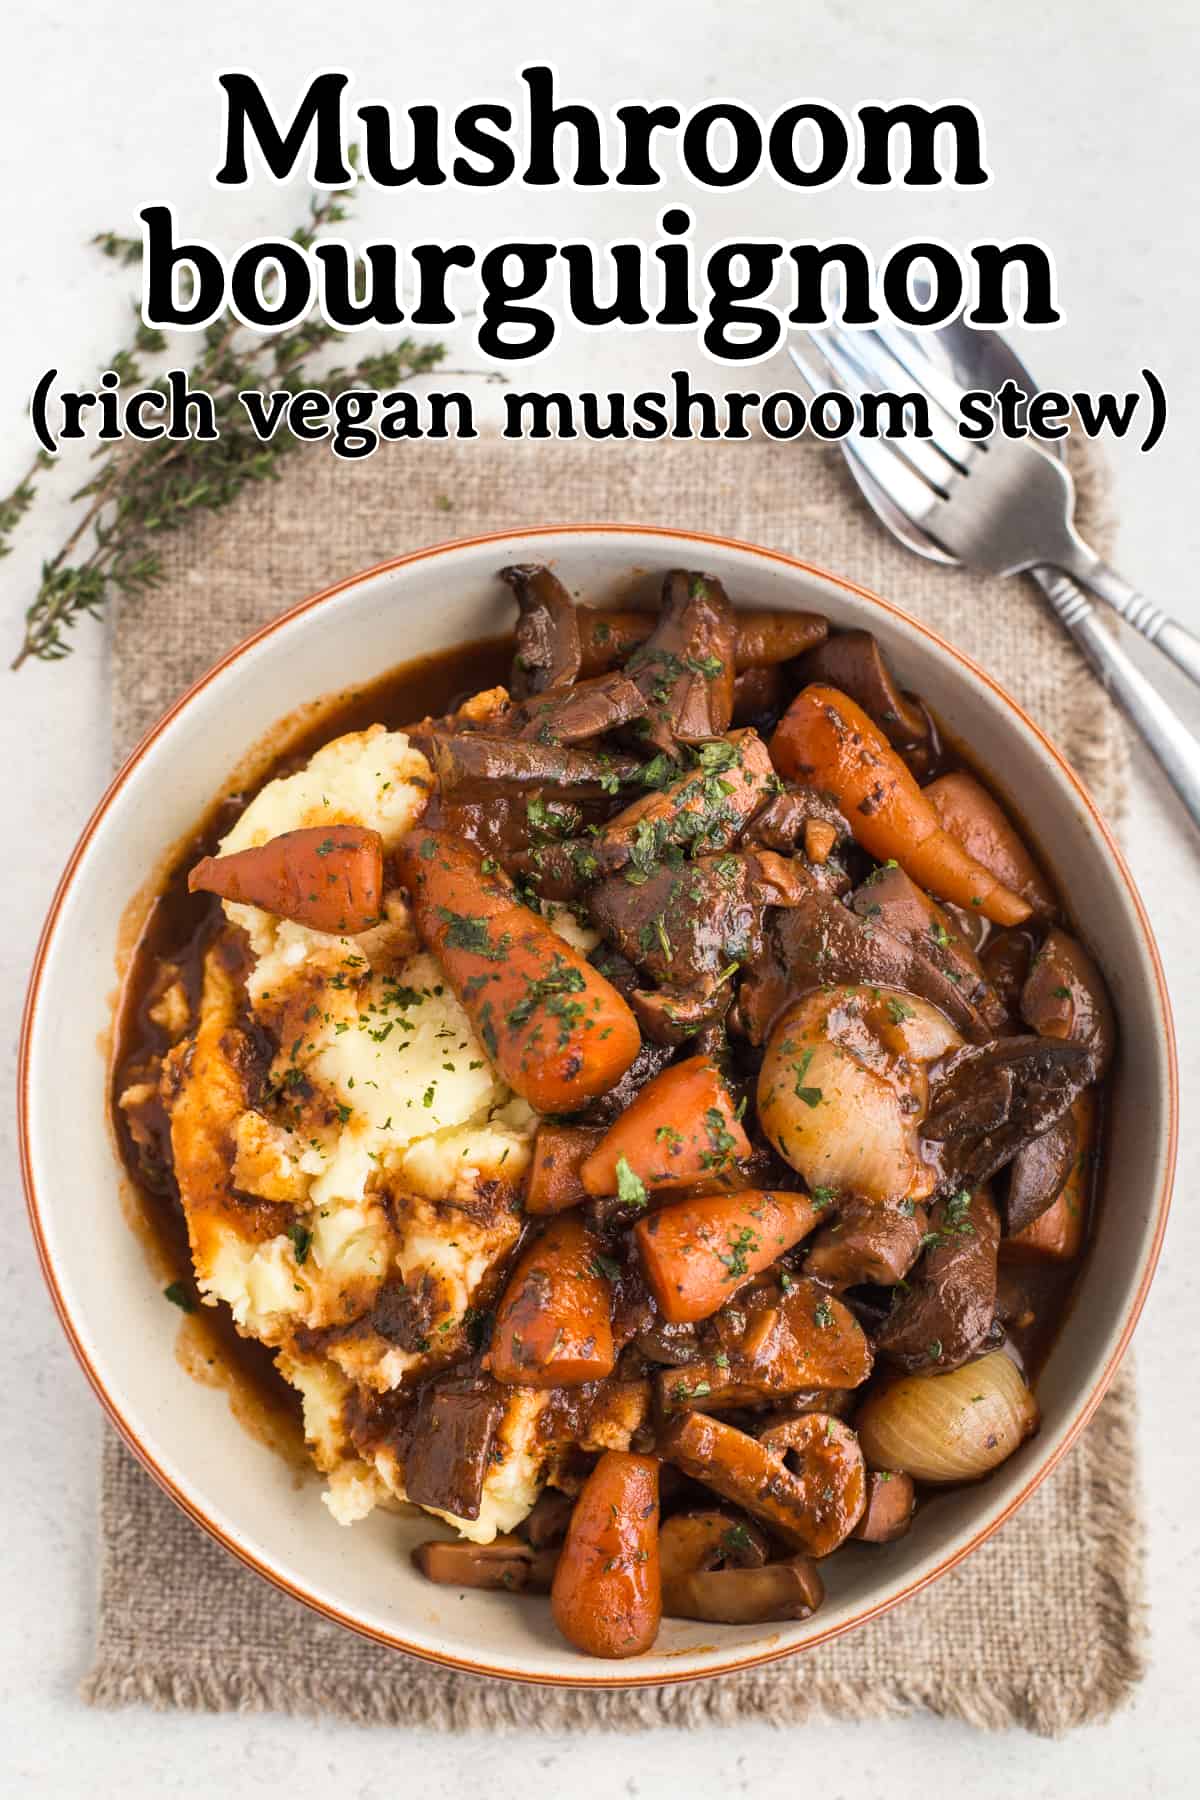 Portion of vegan mushroom bourguignon in a bowl with mashed potatoes.